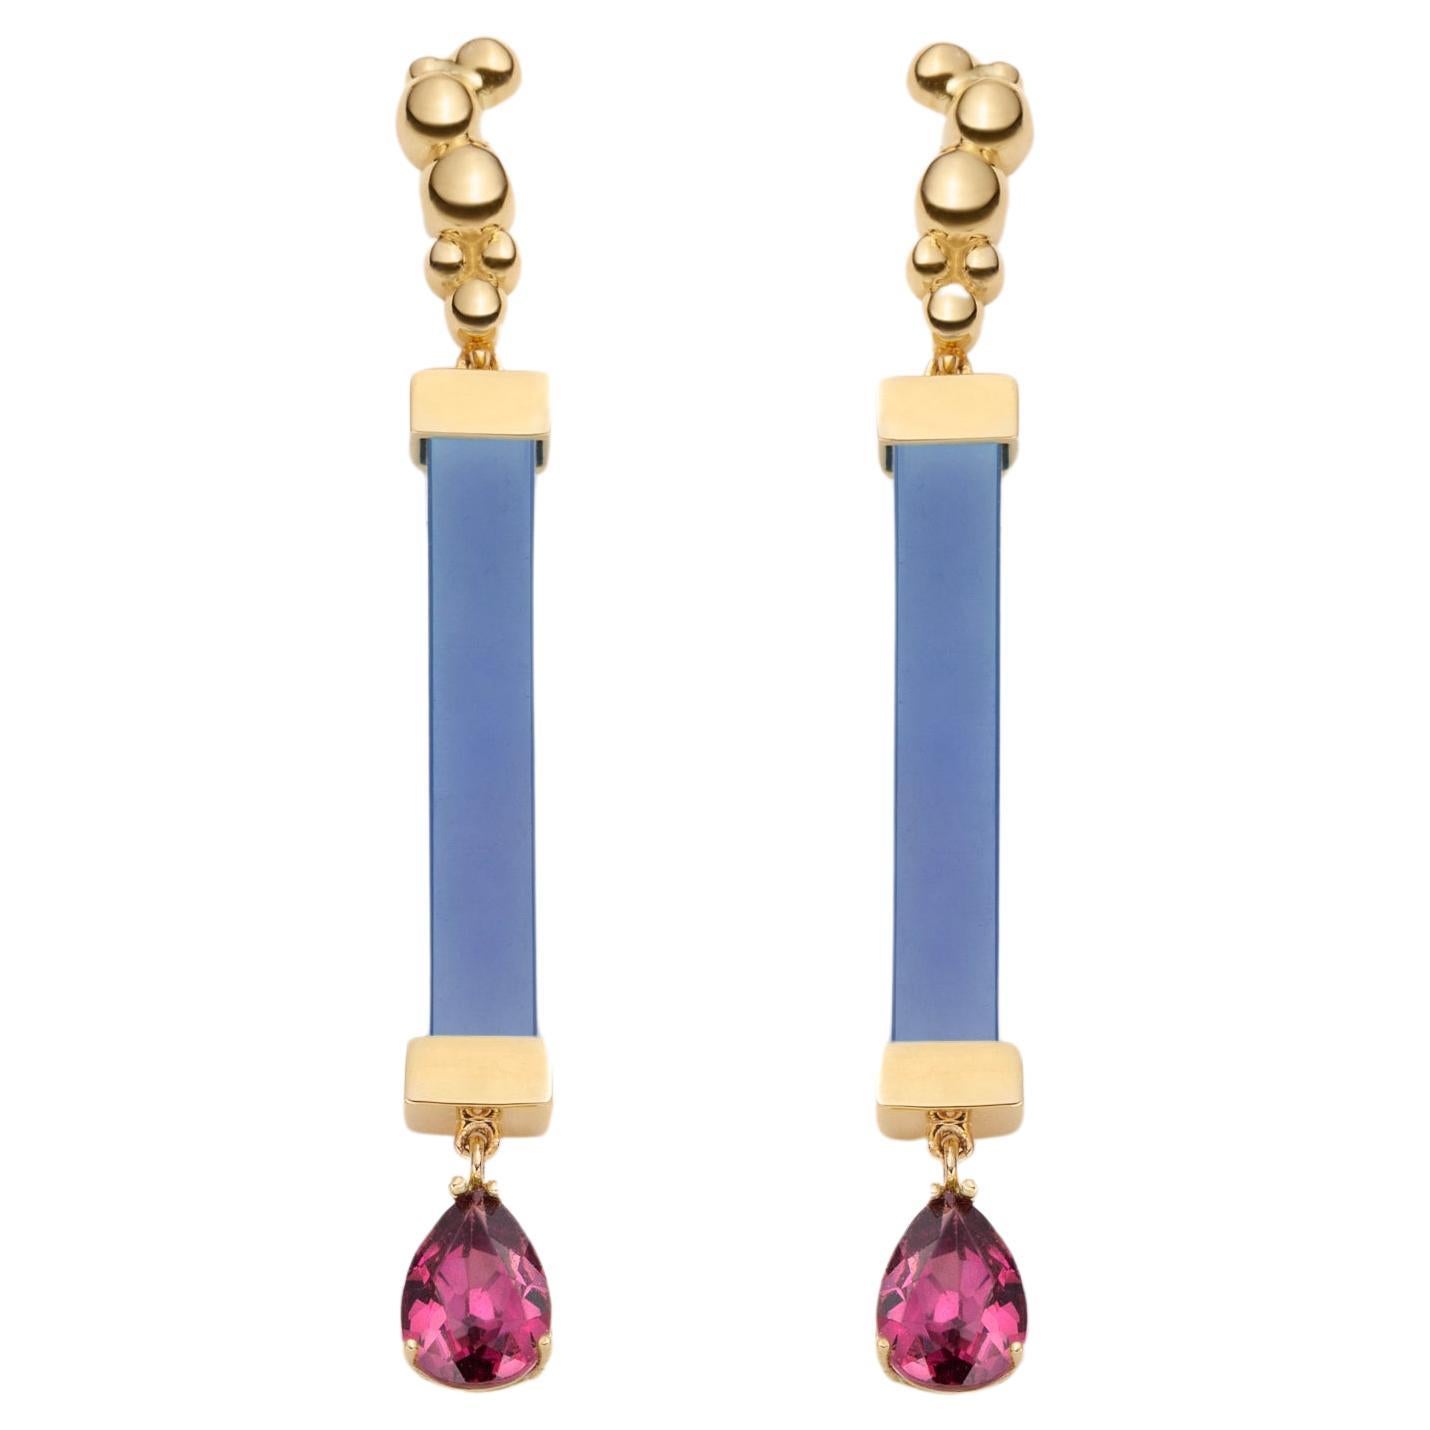 Blue Agate and Rhodolite Earrings in 14K yellow Gold, by SERAFINO For Sale